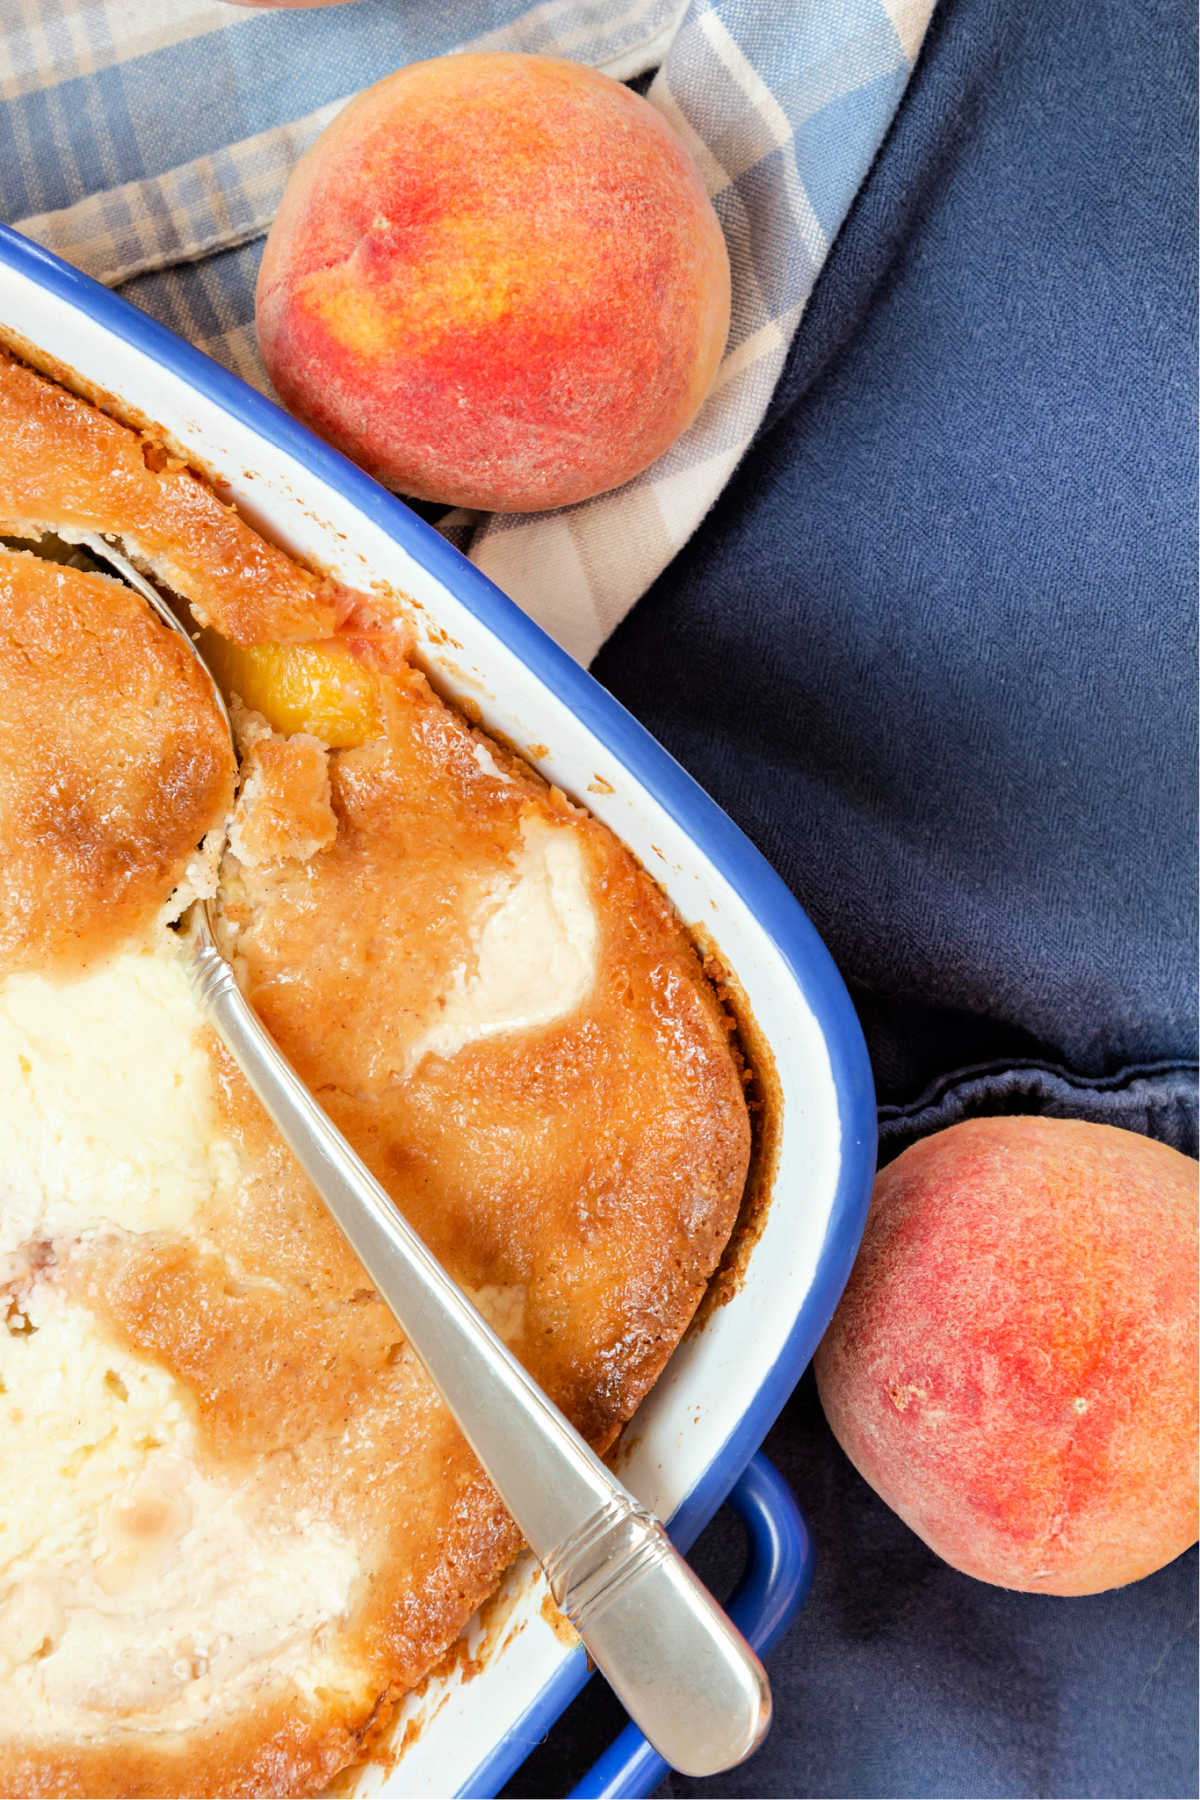 An overhead view of baking dish of peach cobbler and 2 peaches.